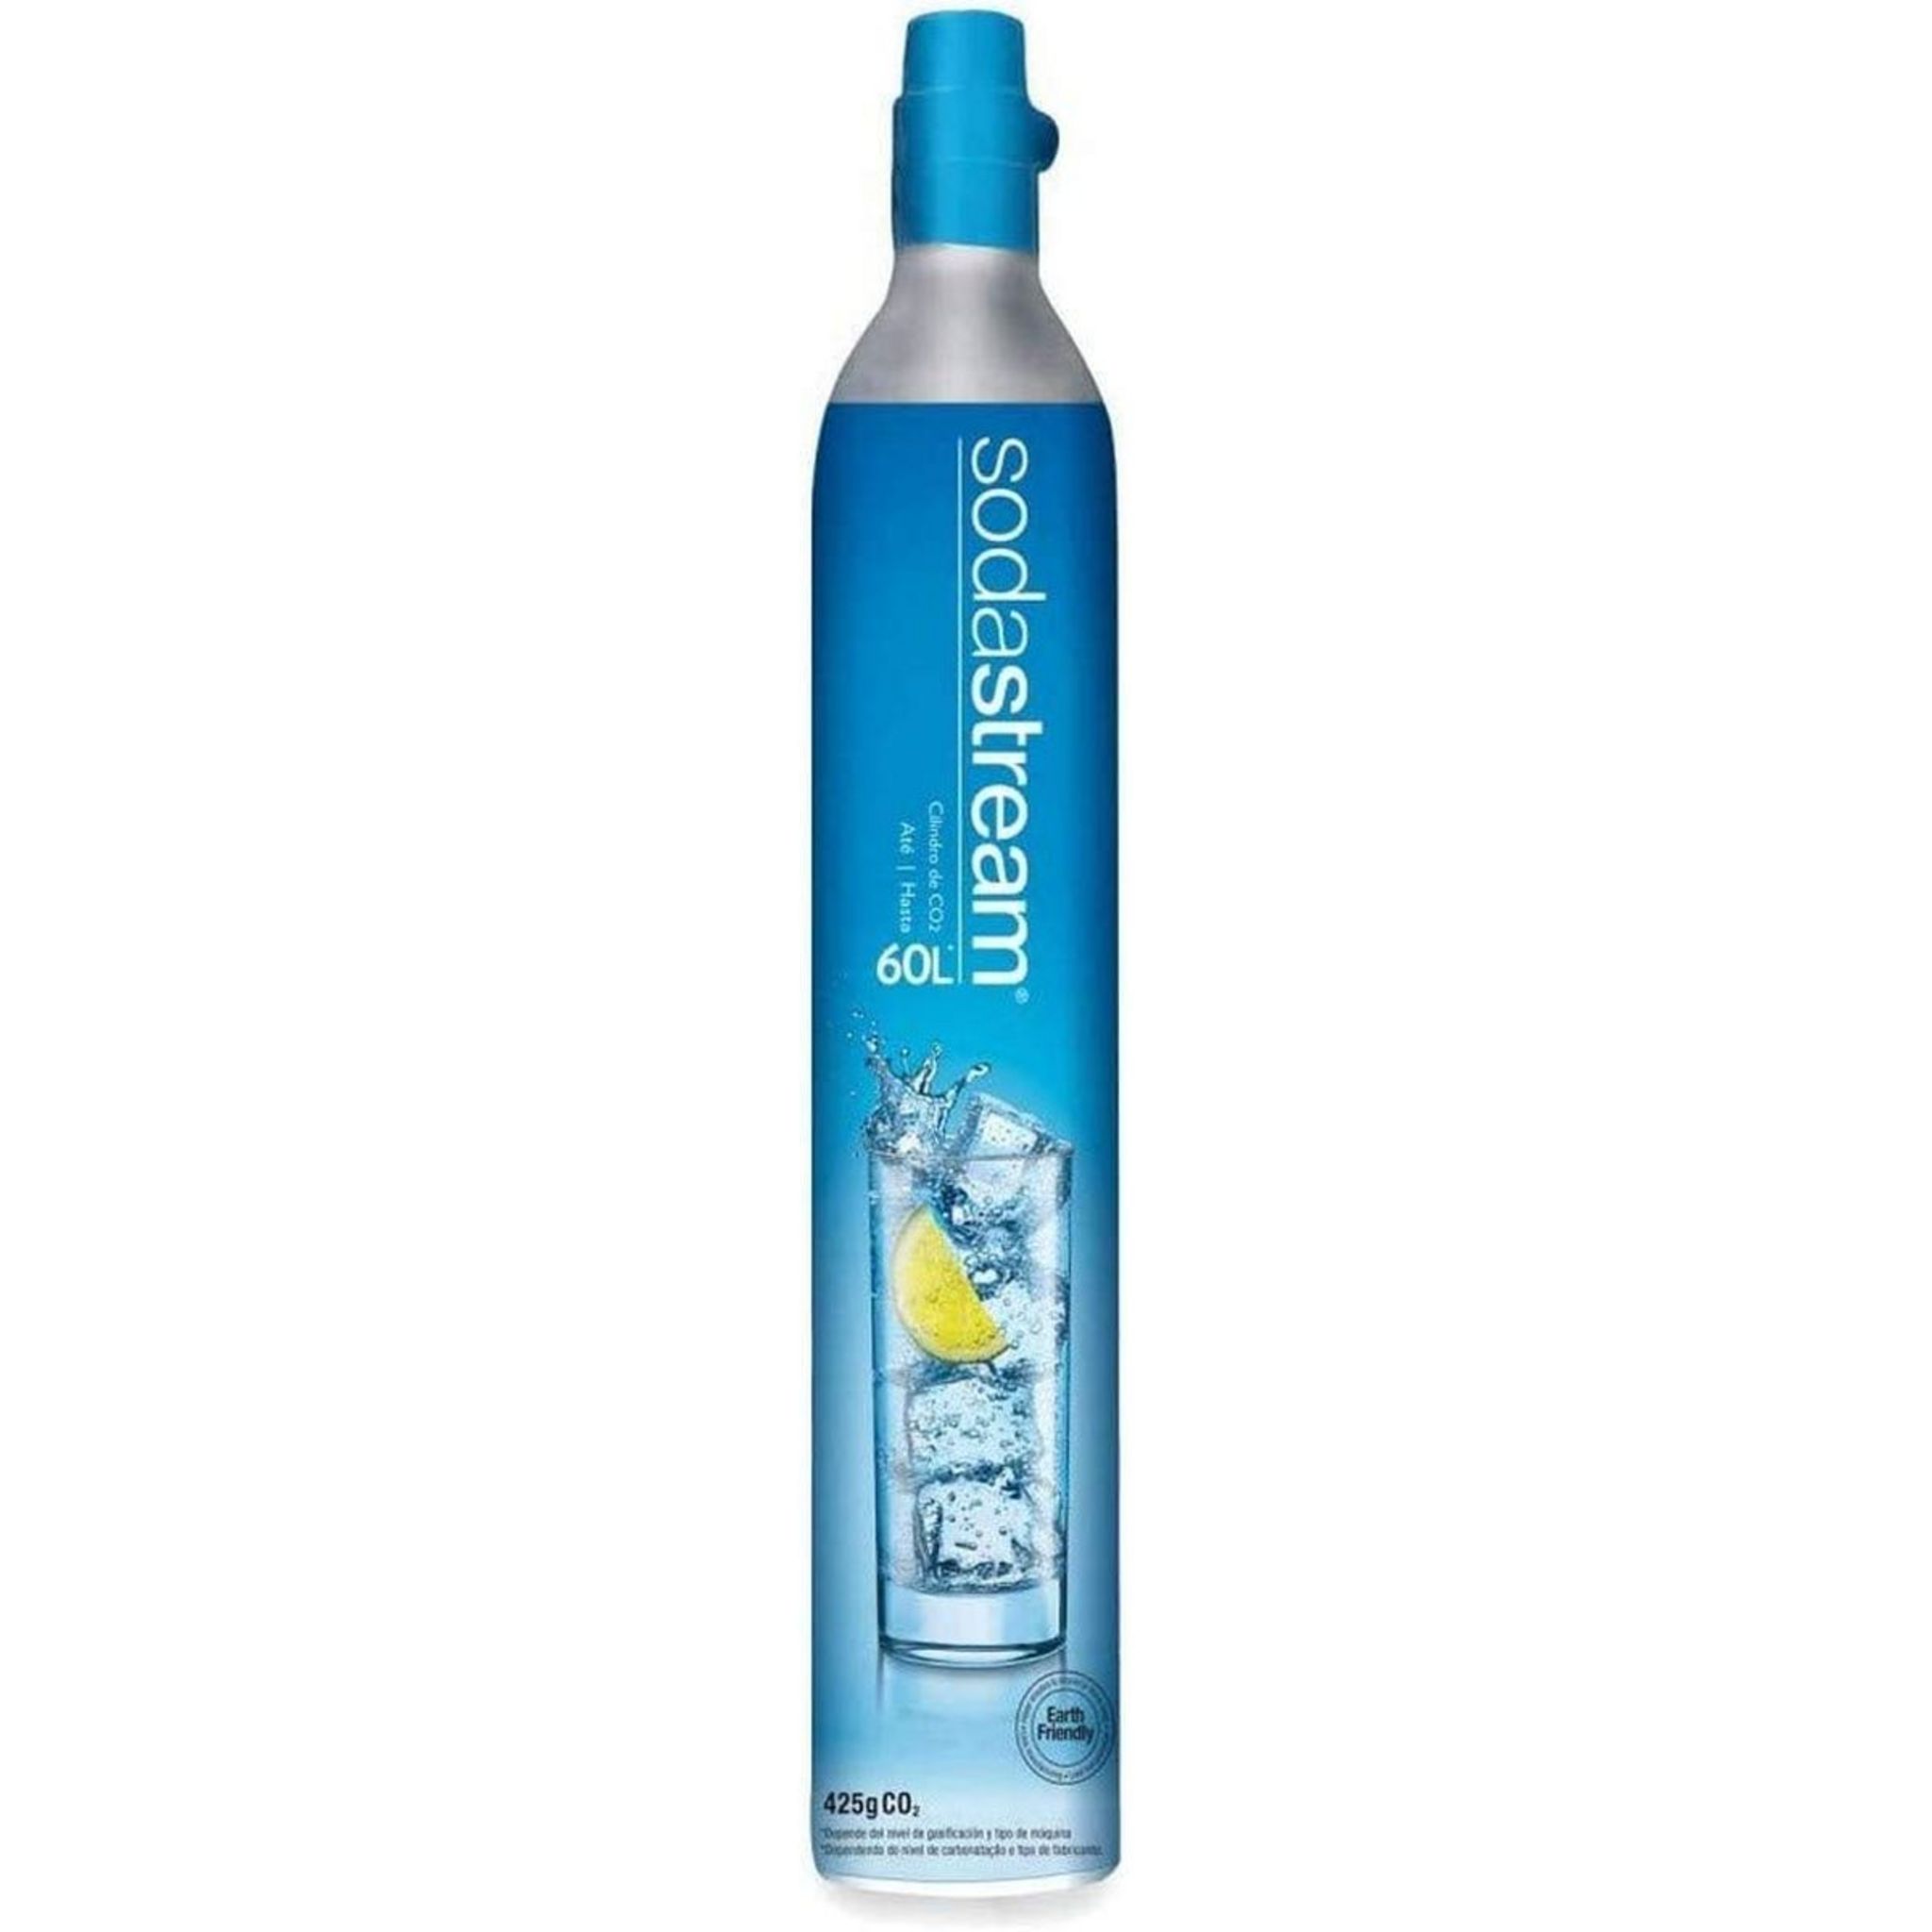 SODASTREAM Recharge Cylindre CO2 60 L pas cher 